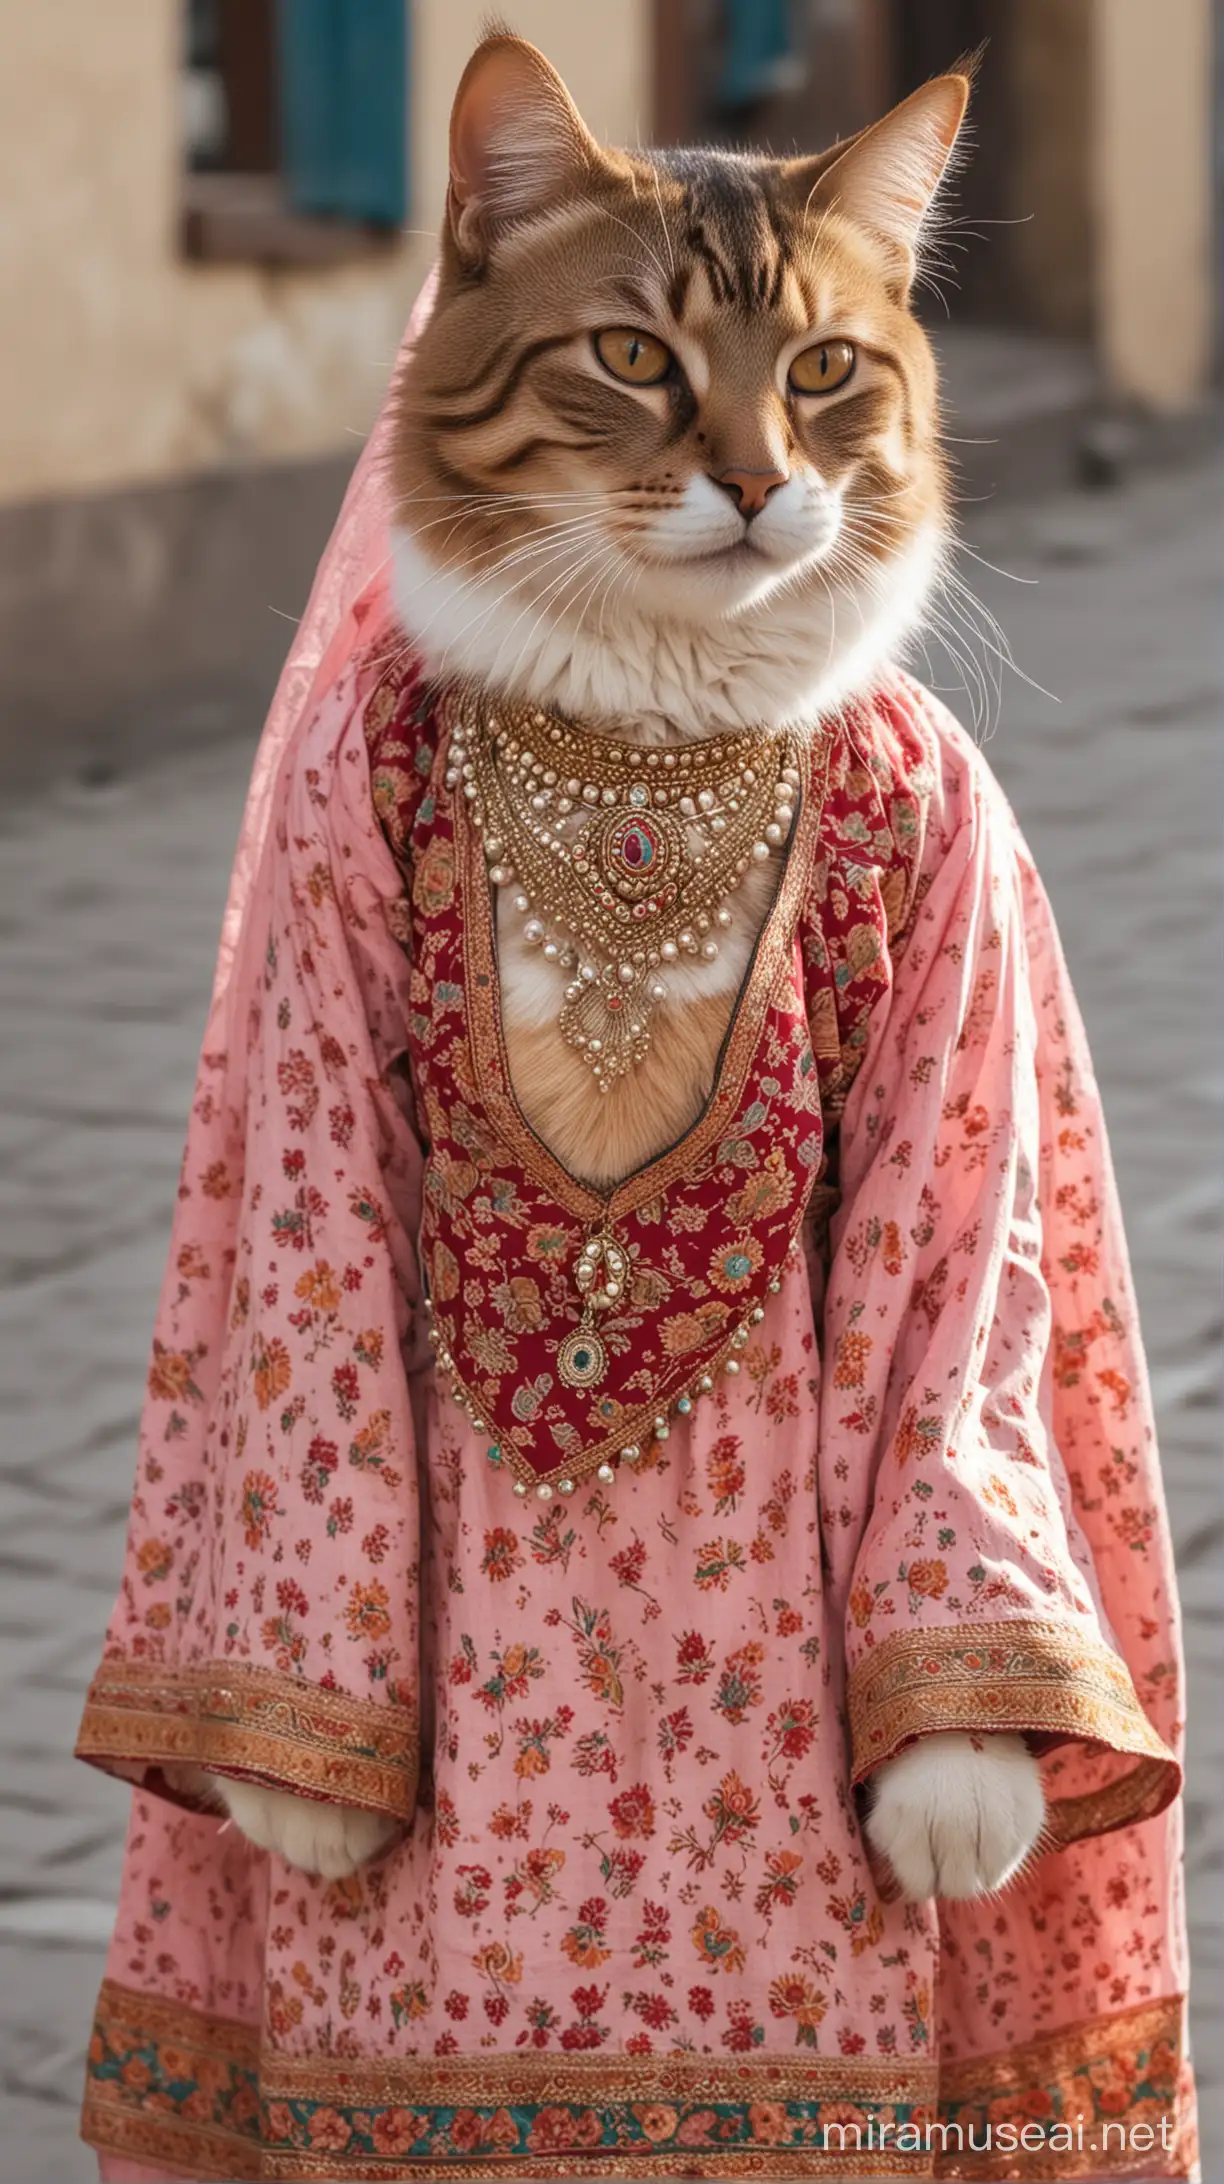 Smiling Pretty Cat in Traditional Indian Attire on City Street